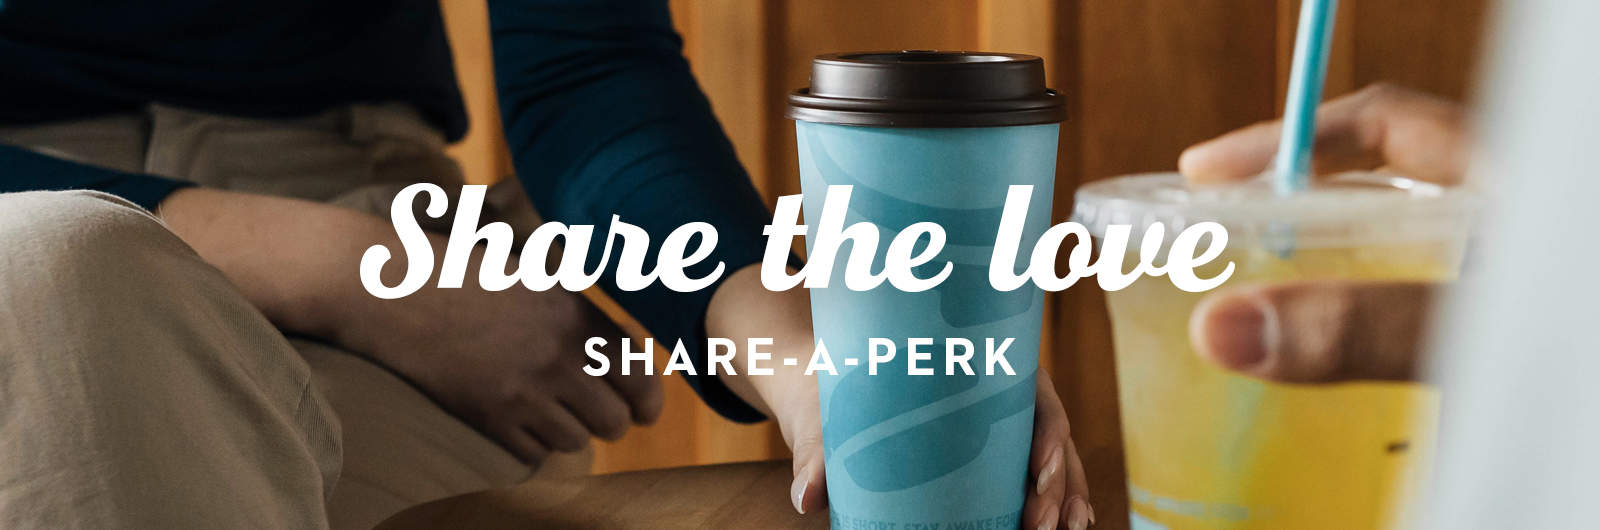 Share the love. Share-A-Perk in the Caribou Coffee App 